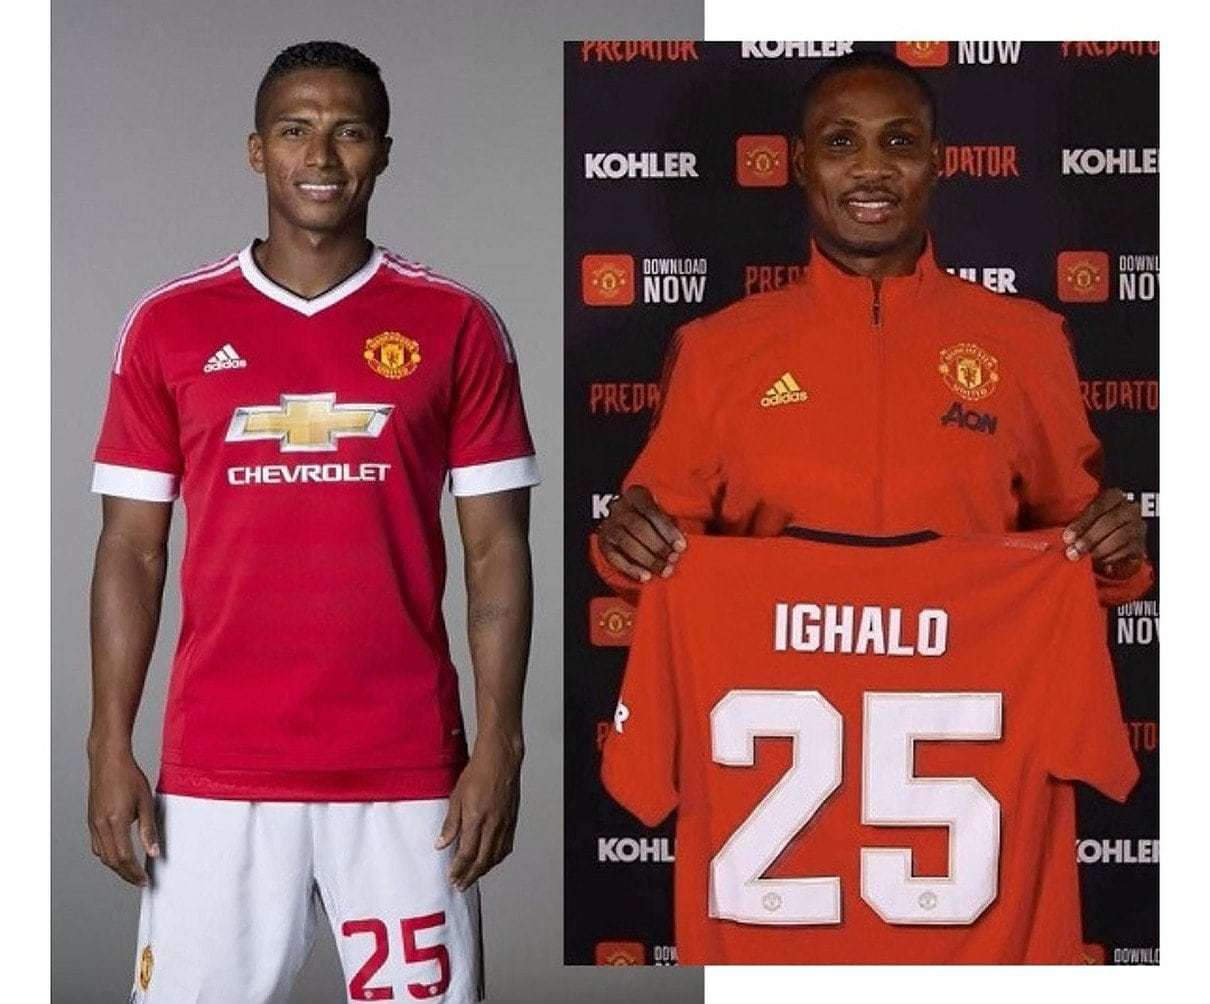 ighalo jersey number